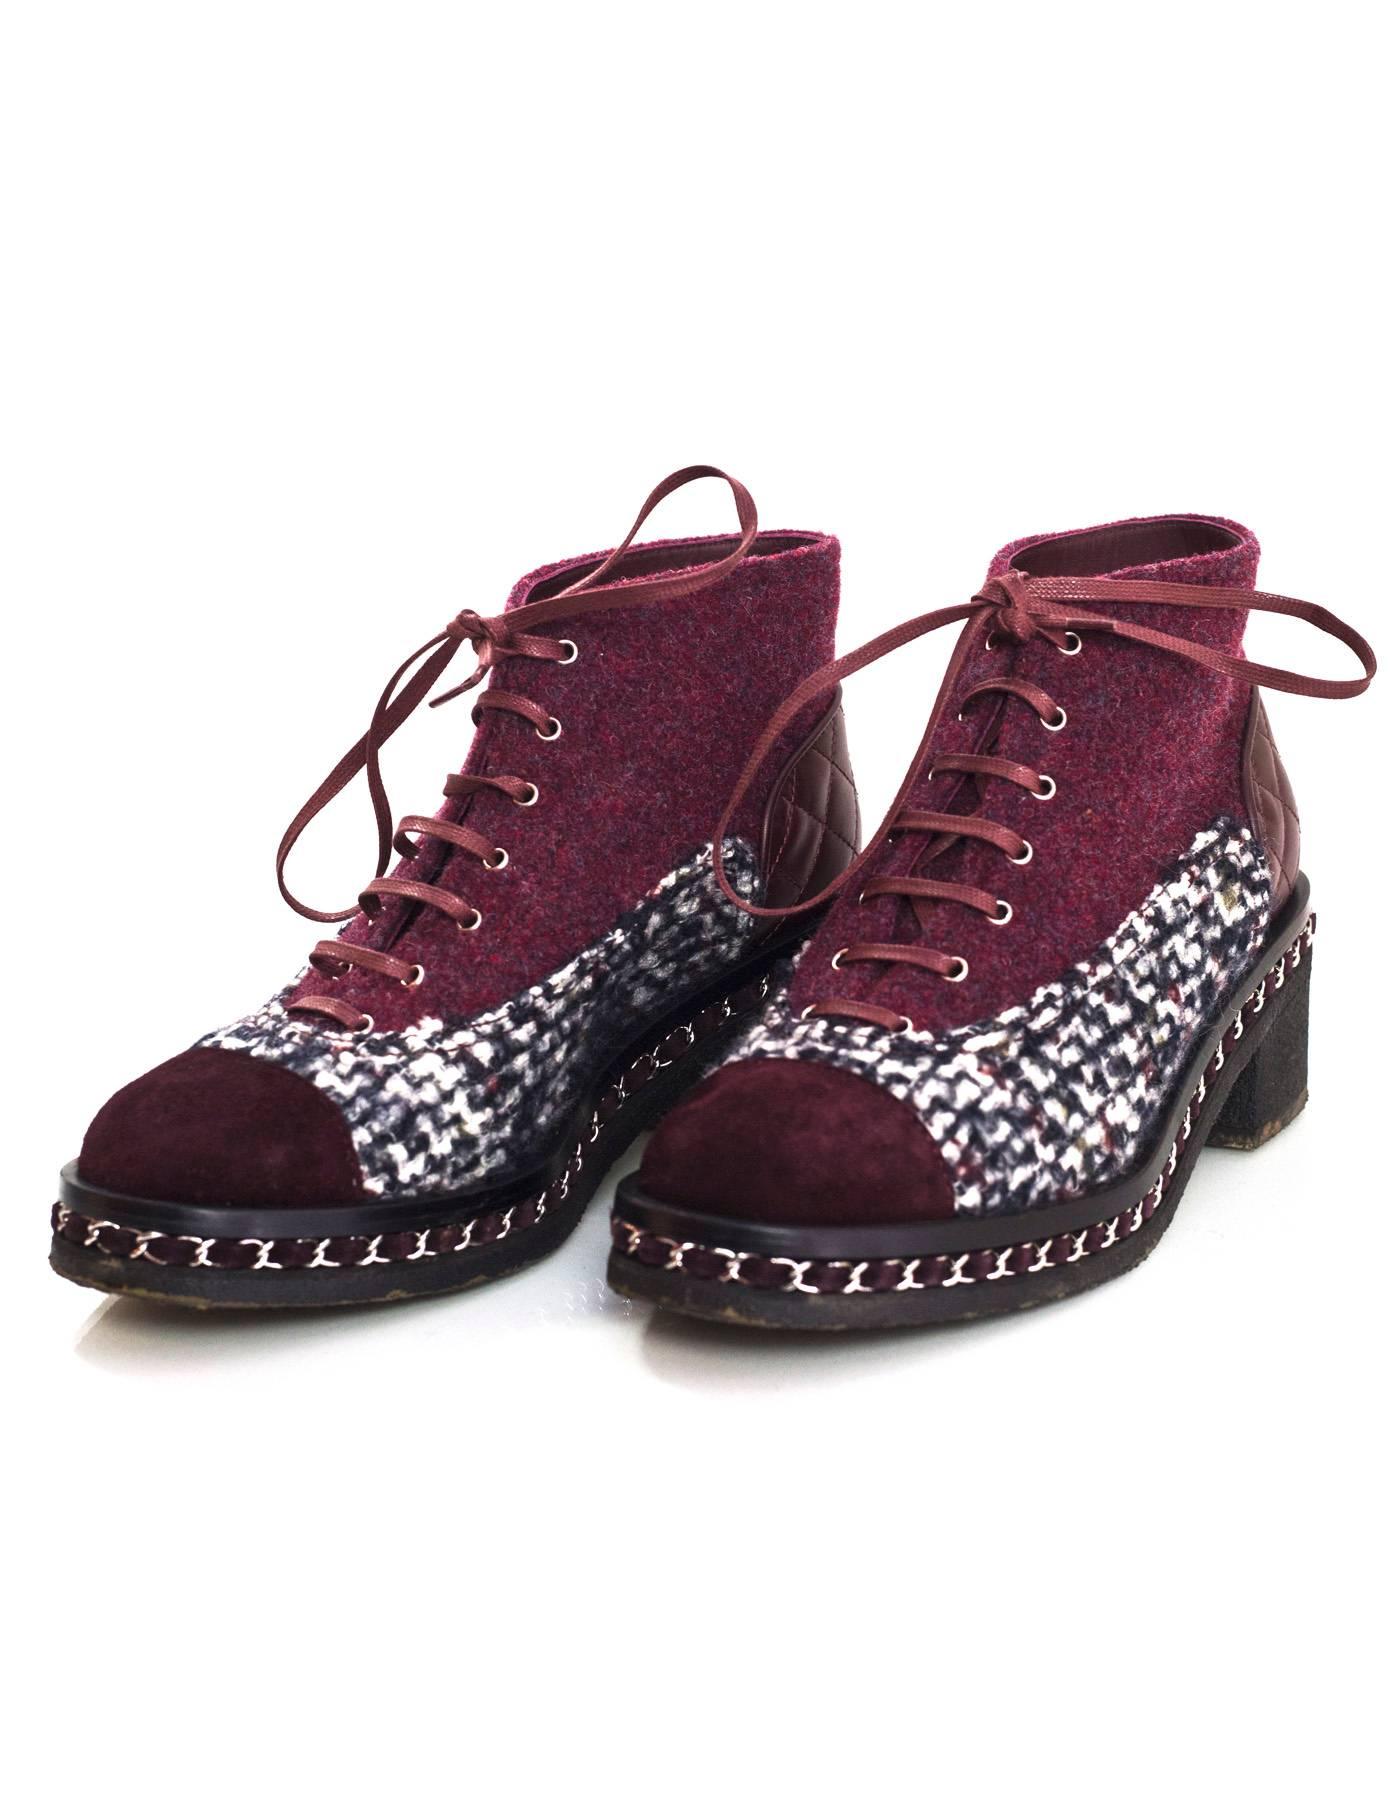 Chanel Burgundy, Black & White Tweed Boots Sz 39
Features chain around detail at soles

Made In: Italy
Color: Burgundy, black and white
Materials: Suede and tweed
Closure/Opening: Lace tie closure
Sole Stamp: CC 39
Overall Condition: Excellent